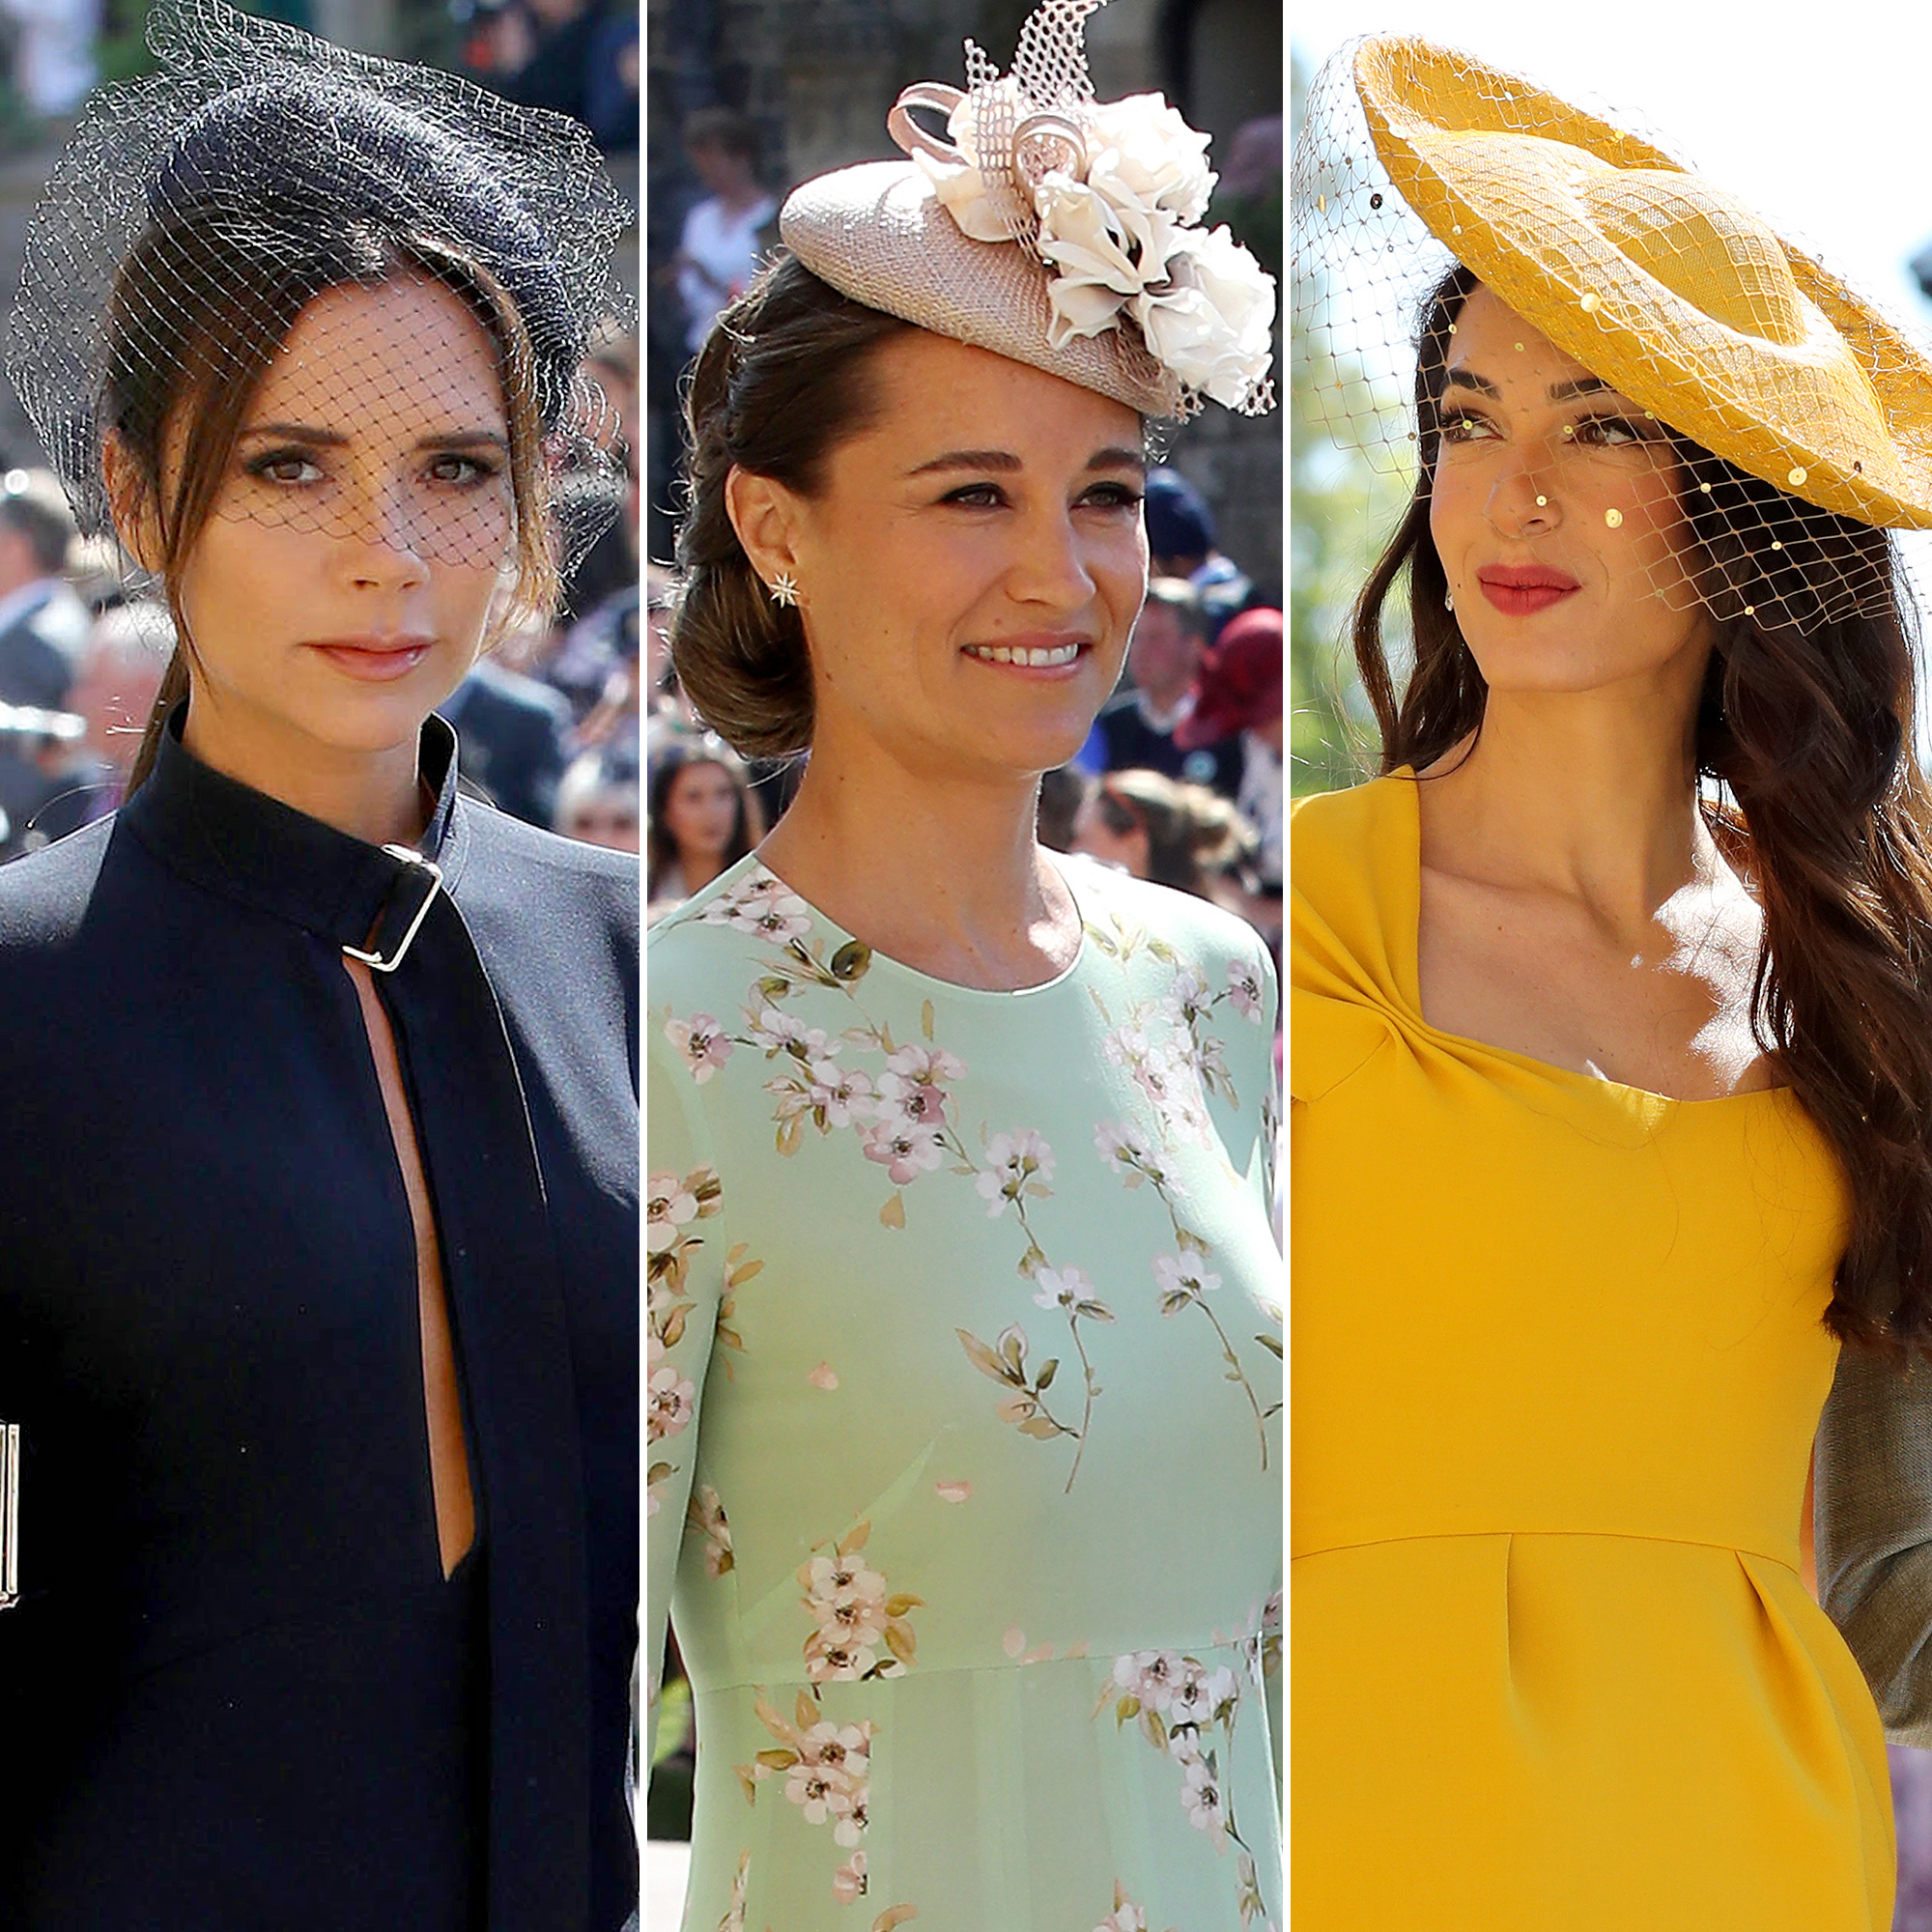 30 Hats and Fascinators to Wear to Prince Harry and Meghan Markle's Wedding